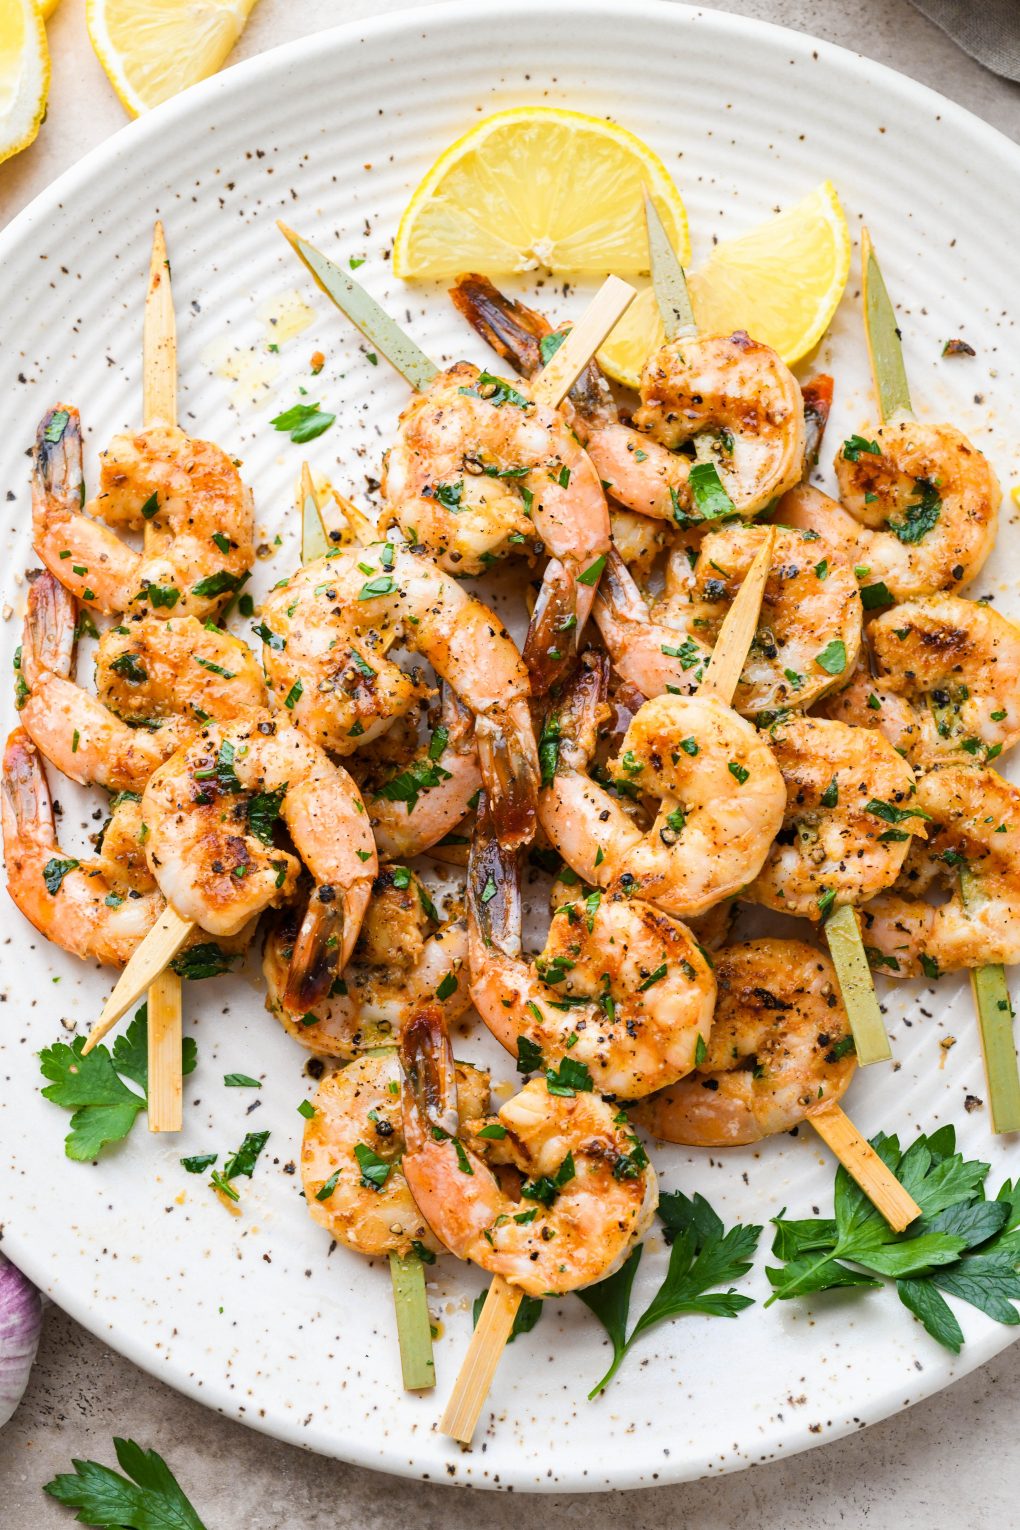 Overhead image of grilled shrimp on wooden skewers. On a light colored speckled plate topped with chopped parsley and next to some lemon wedges.